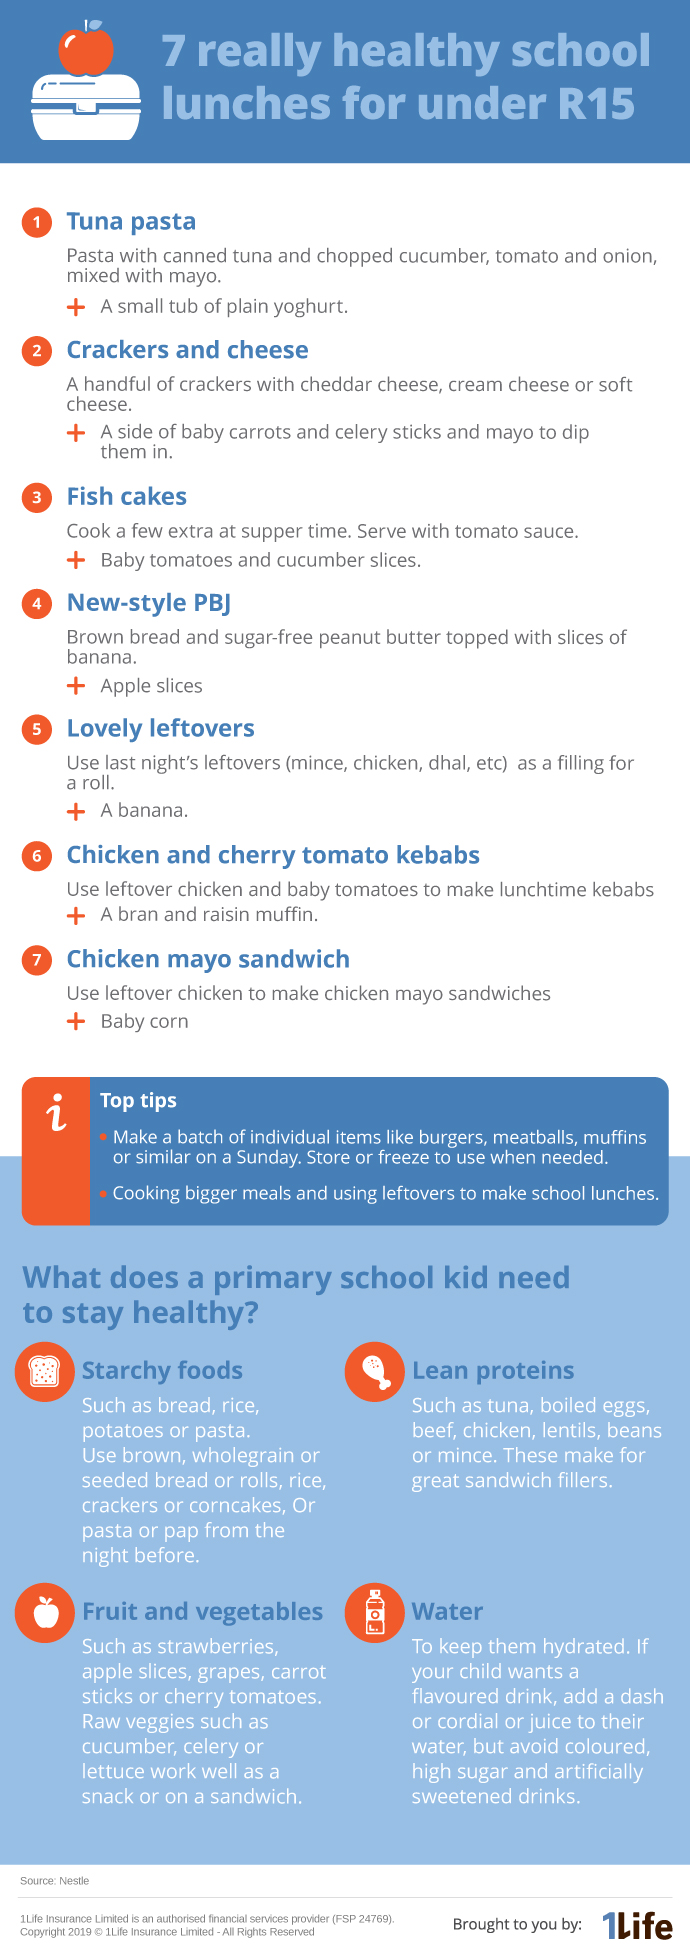 7 really healthy school lunches for under R15